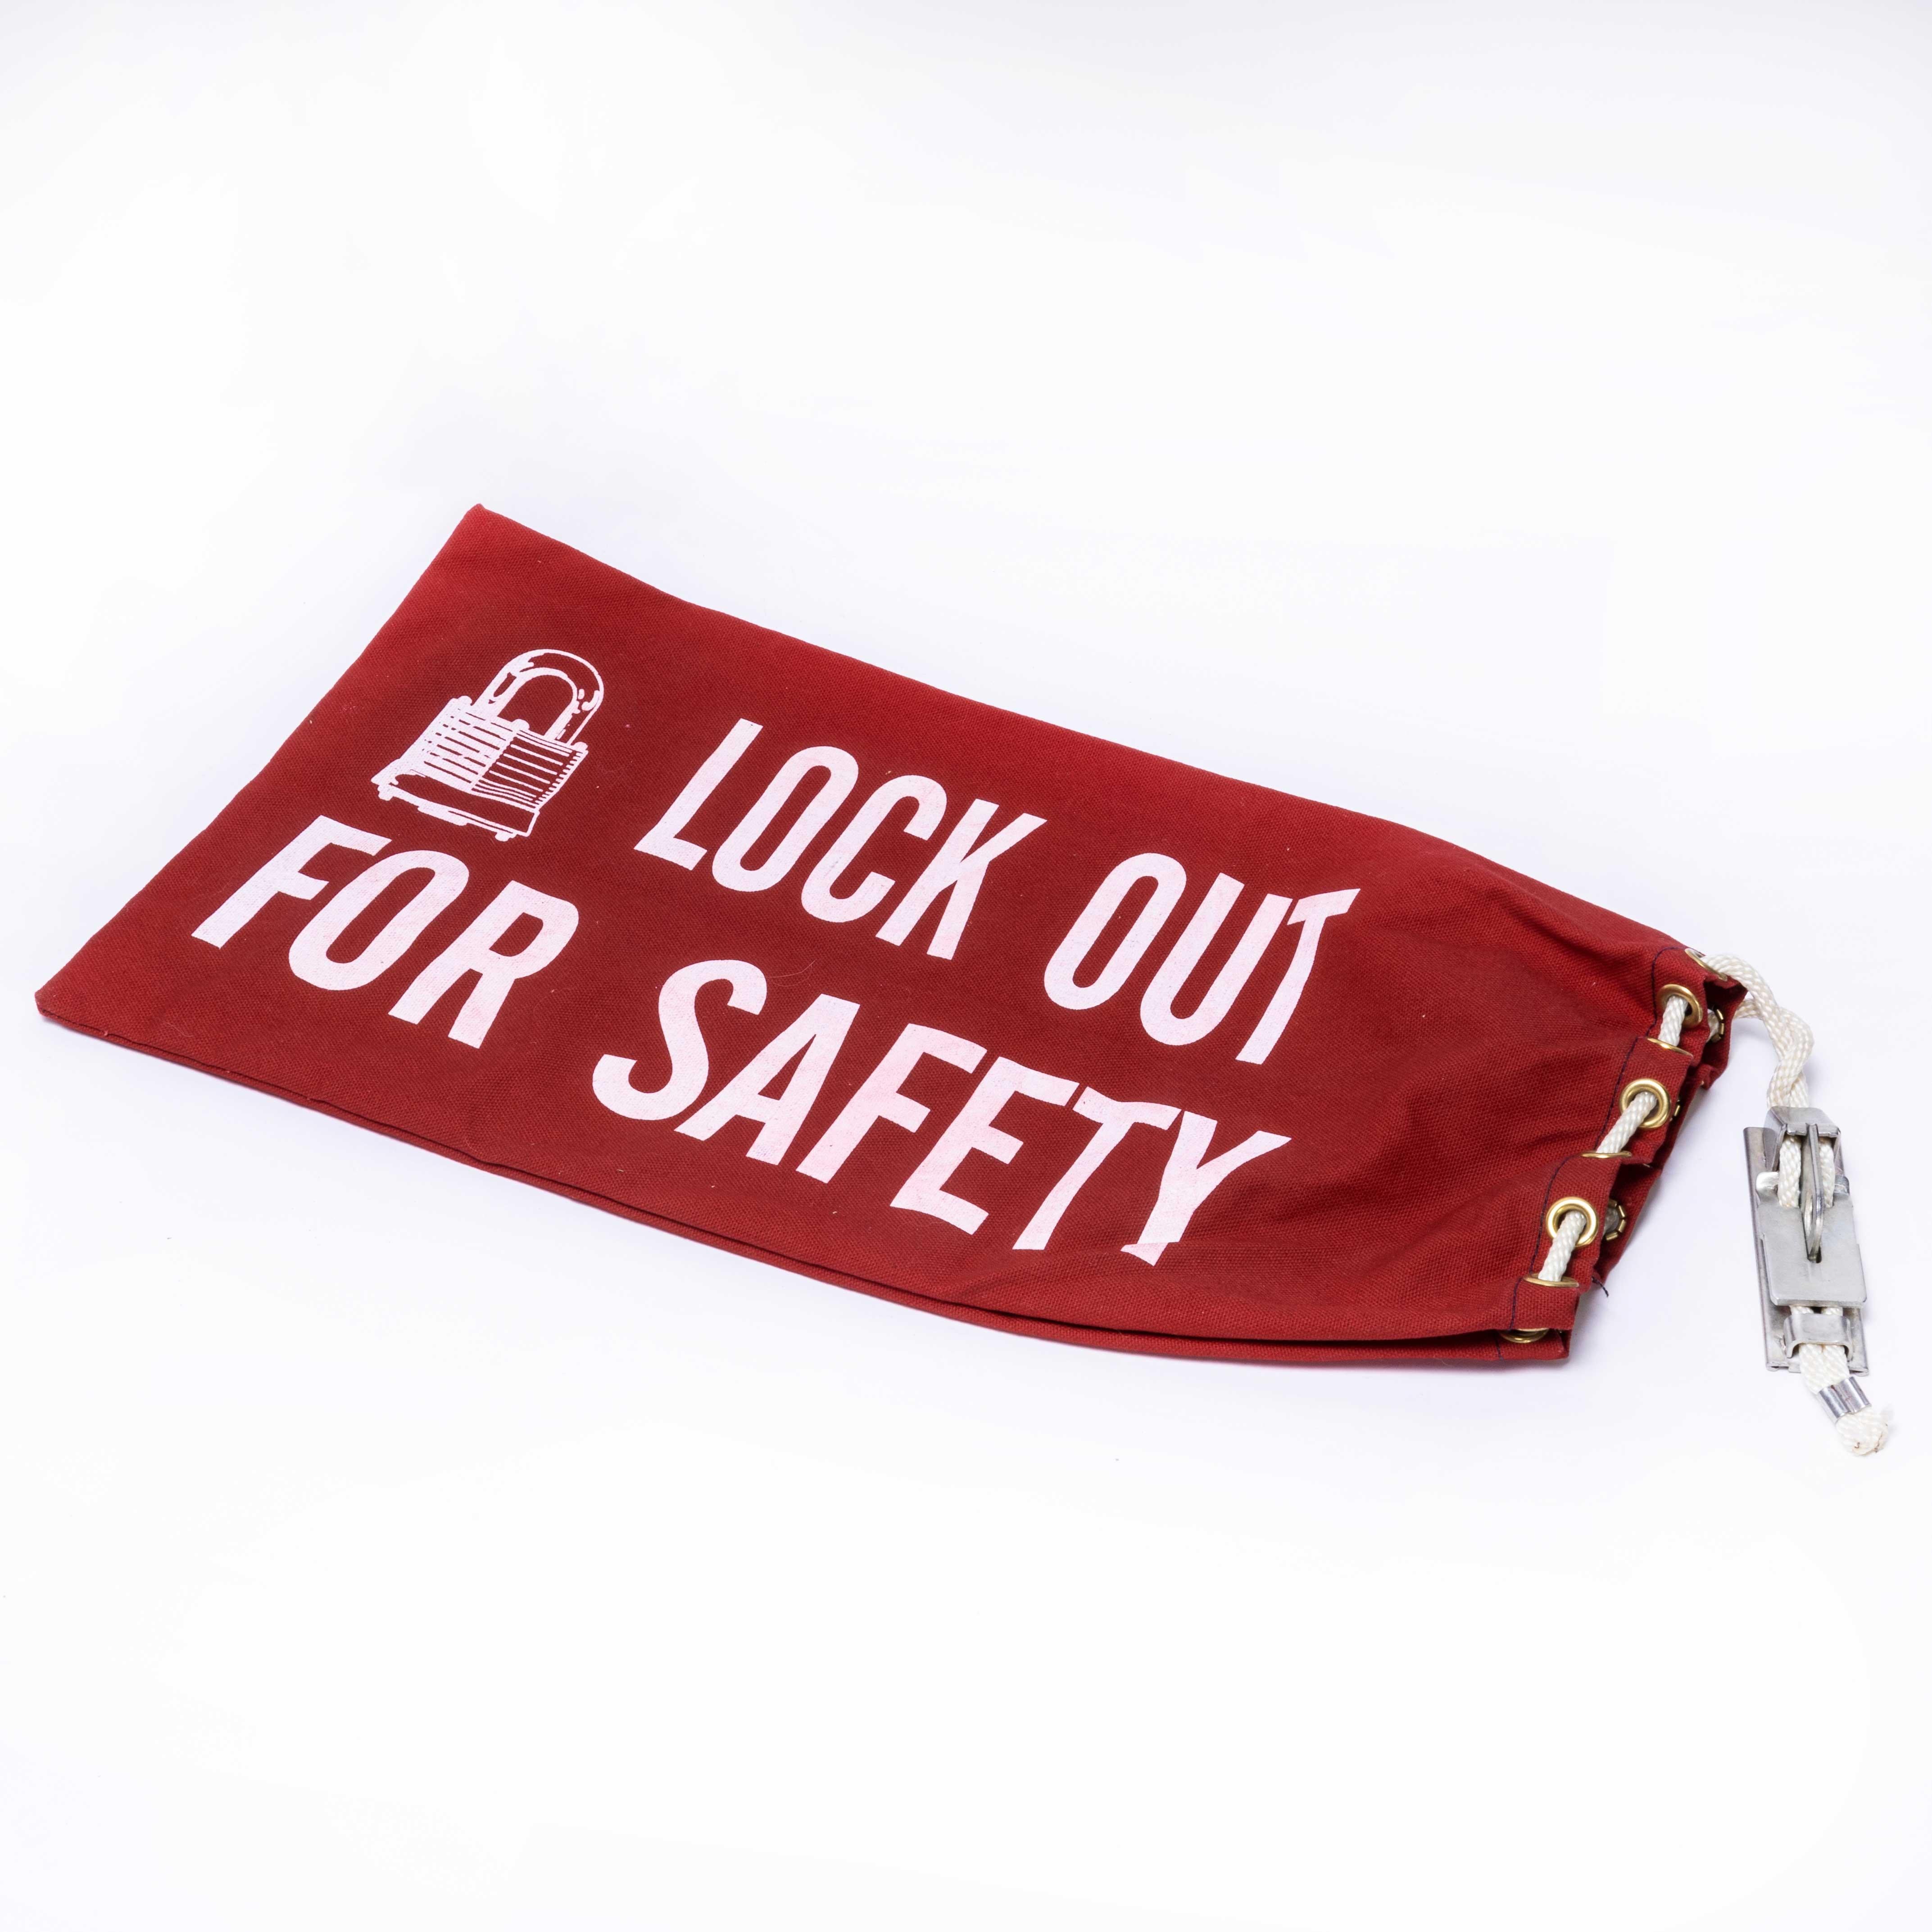 Vintage American lock out for safety bag
Vintage American lock out for safety bag. Used for postal security. Excellent condition.

WORKSHOP REPORT
Our workshop team inspect every product and carry out any needed repairs to ensure that everything